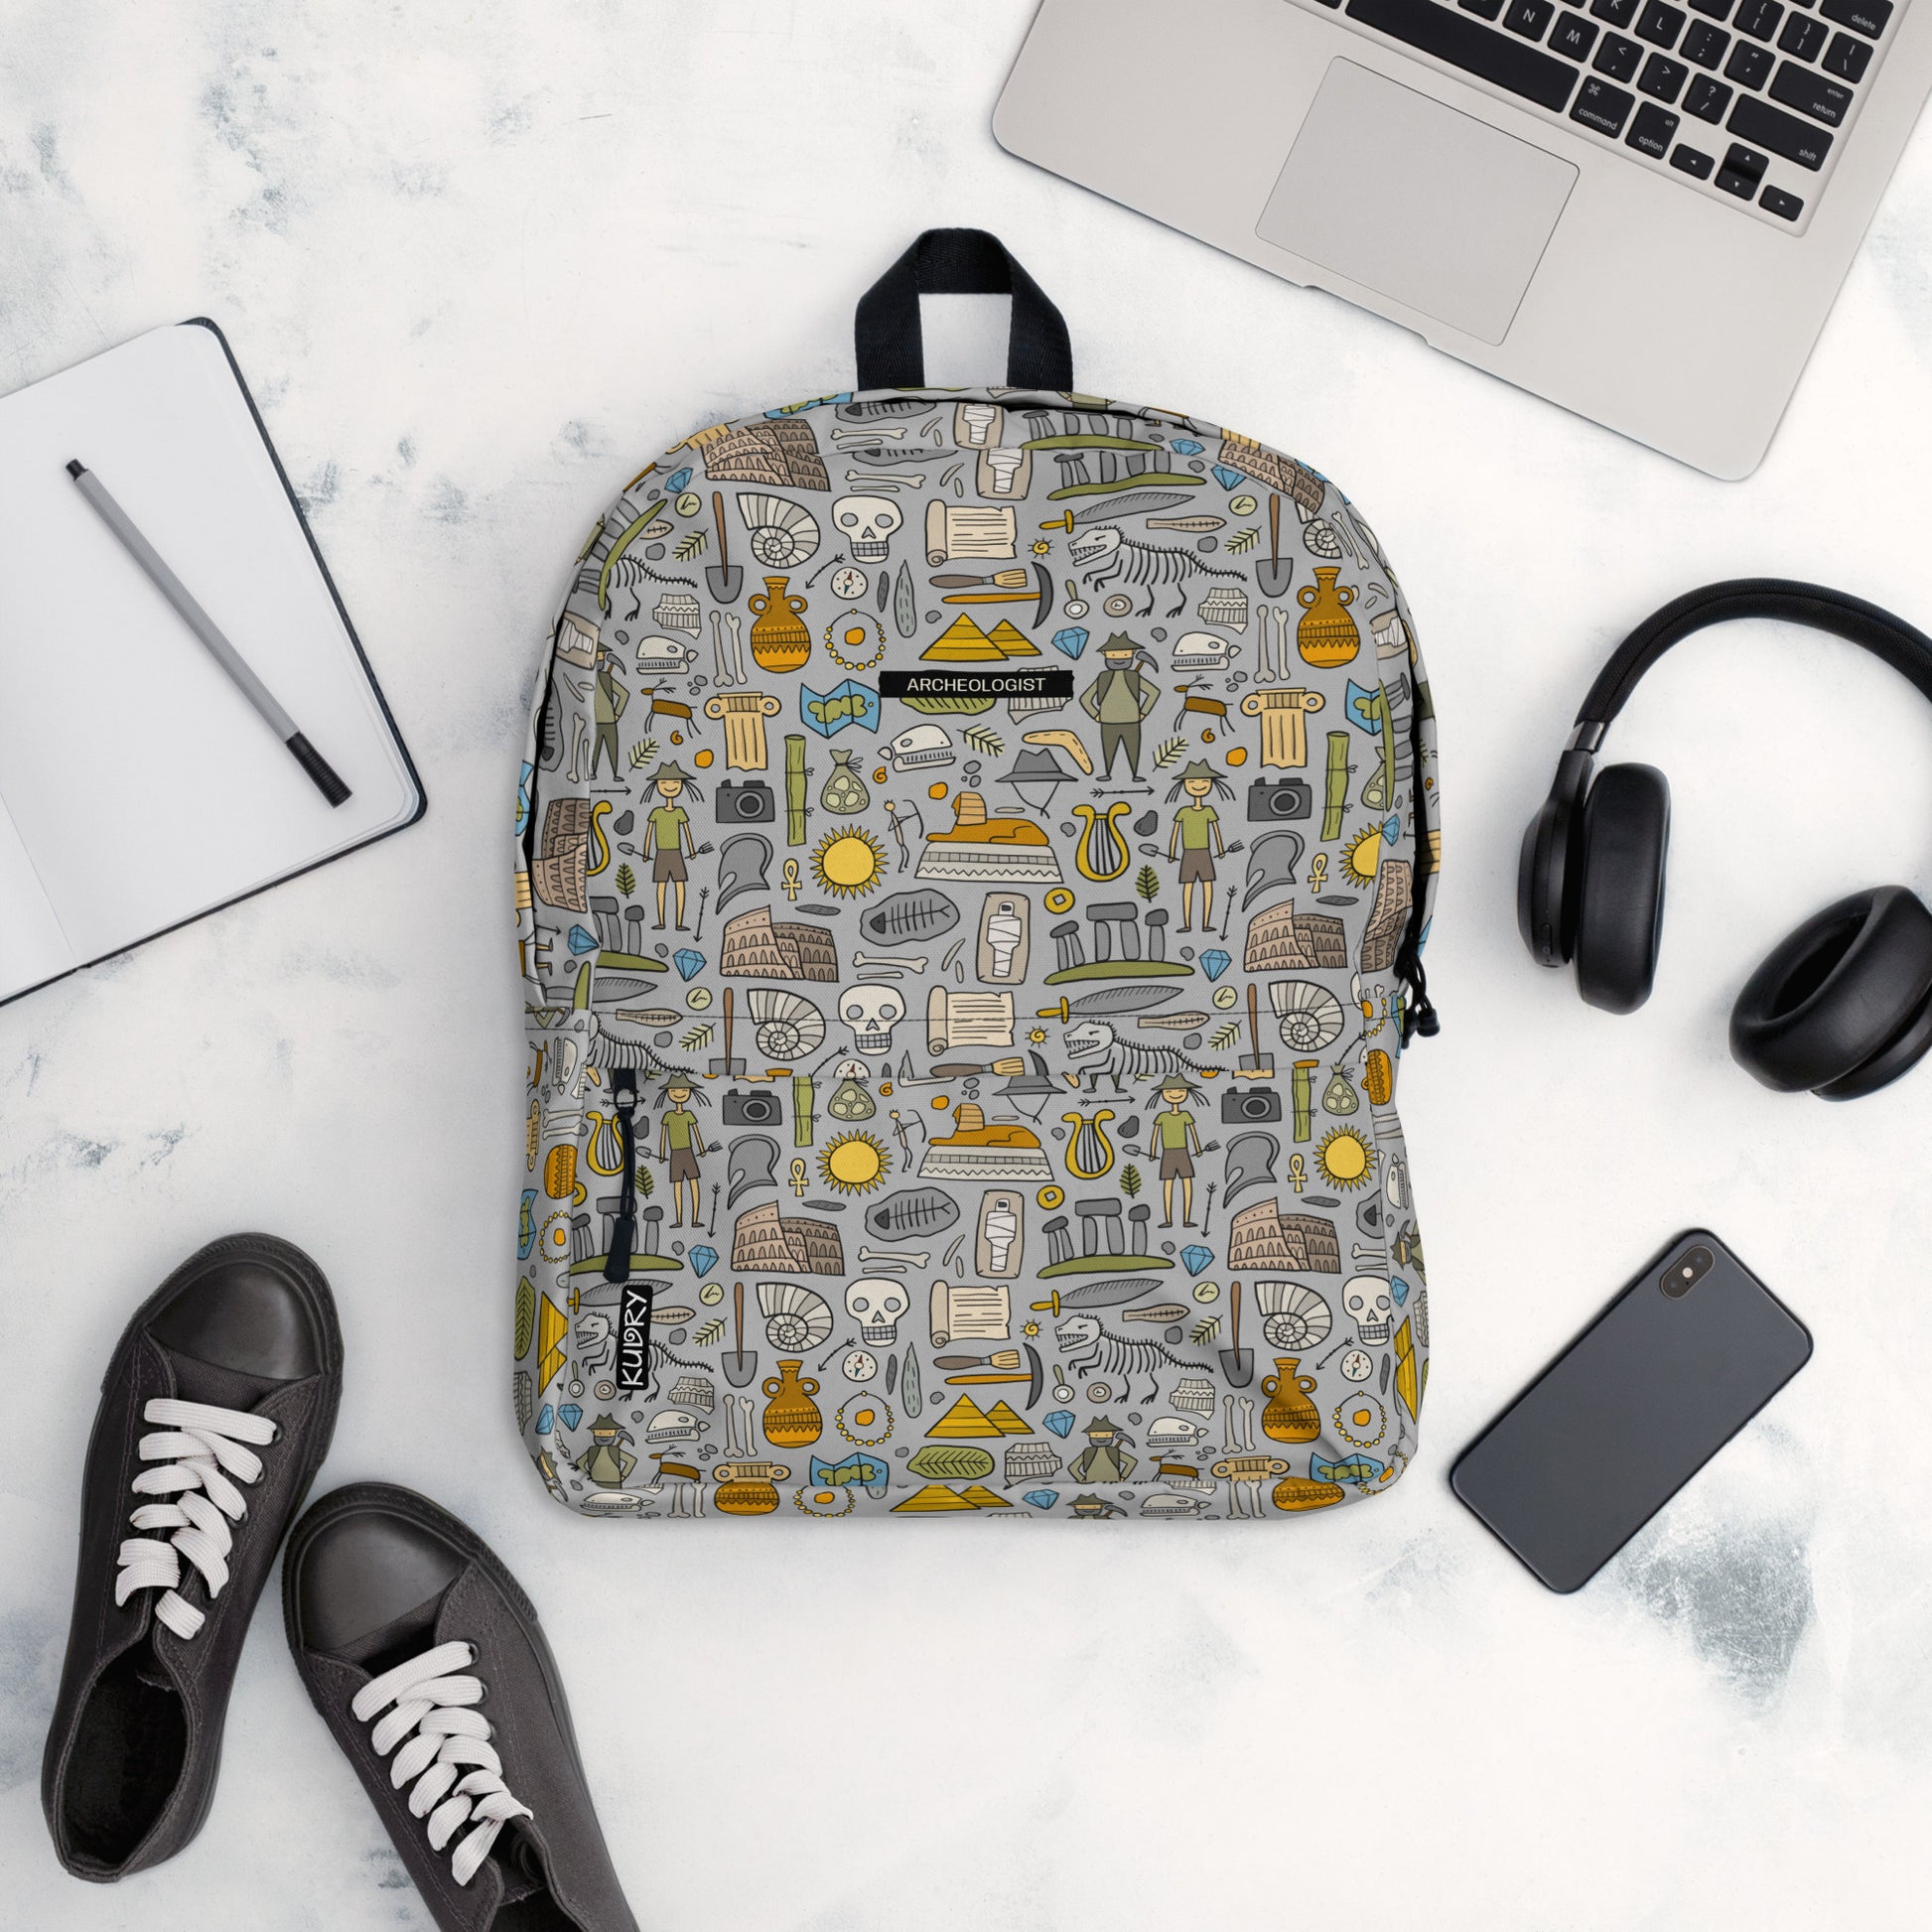 Personalised Backpack for Archeology lover, stylish designer print on grey. Basic text you can change - Archeologist